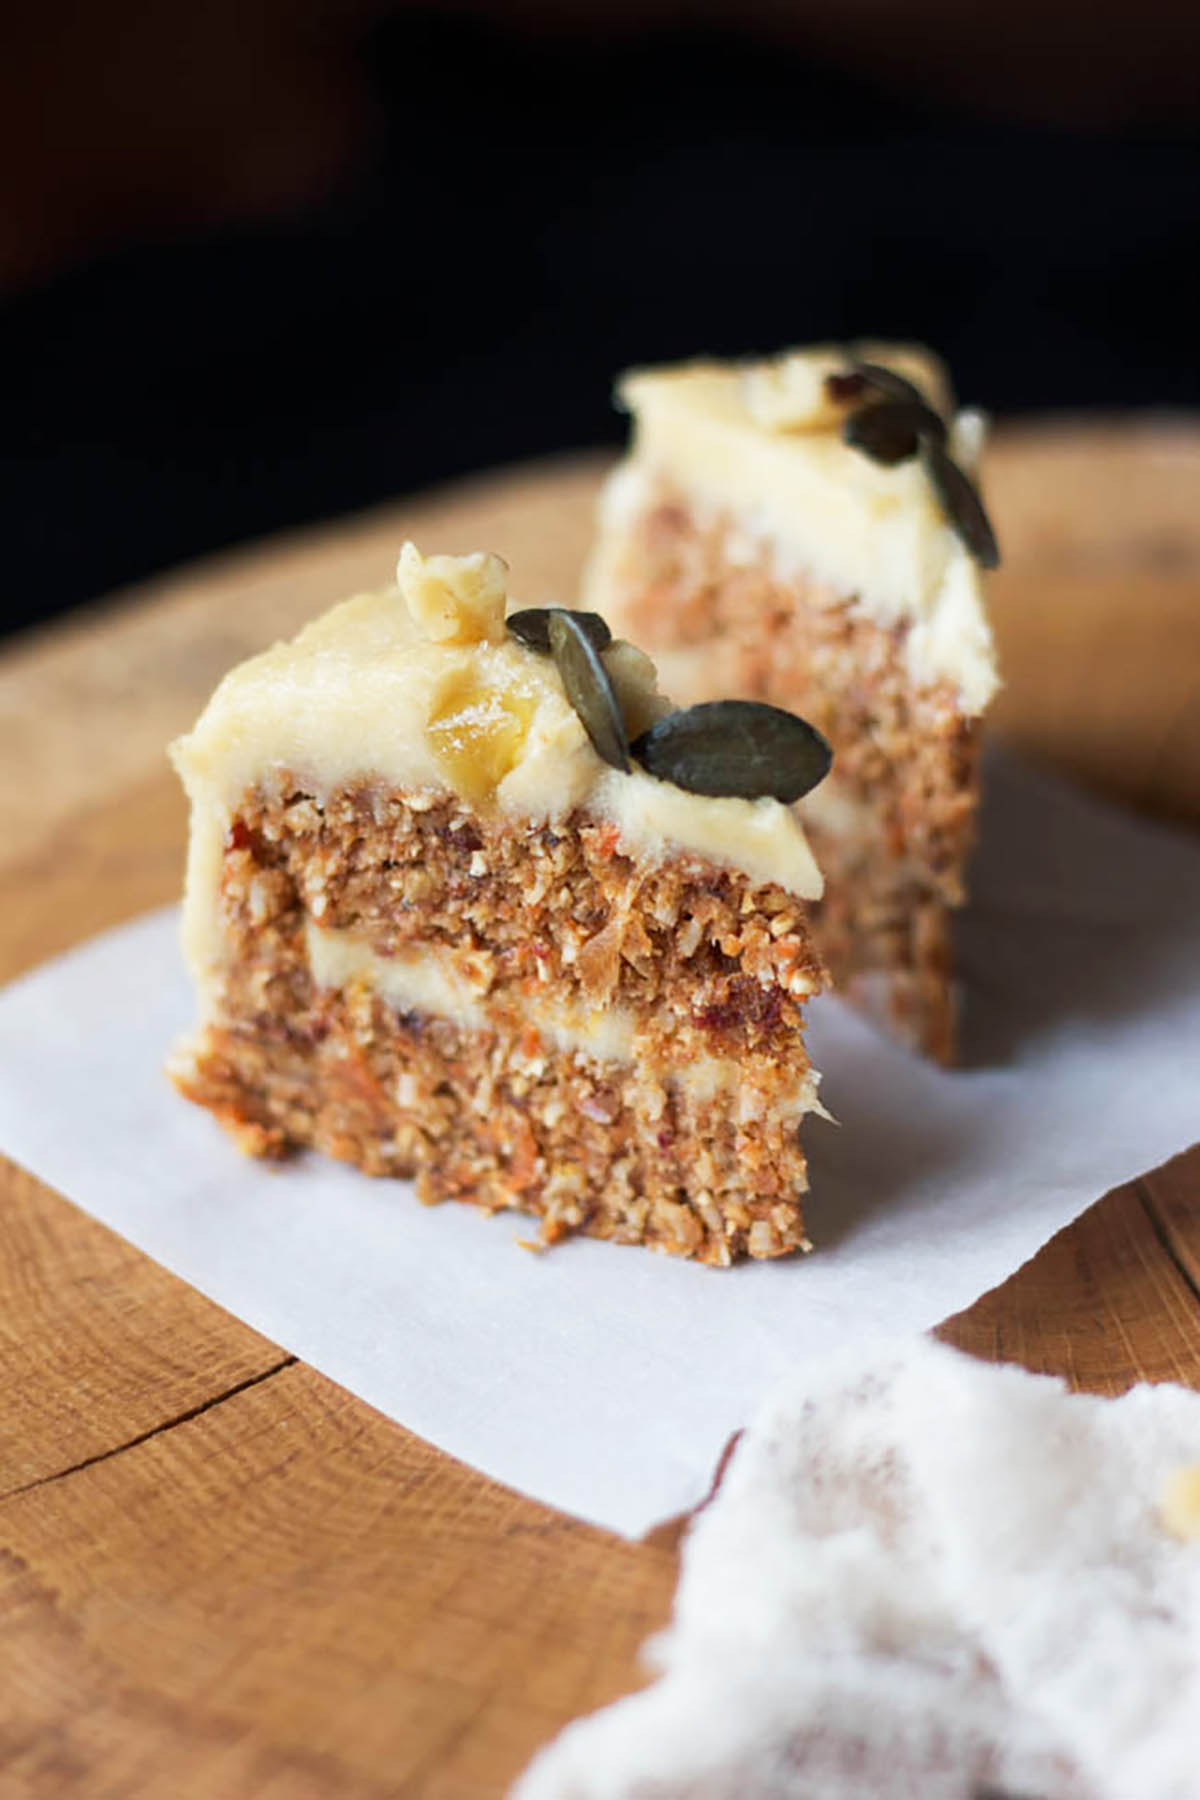 Two small slices of raw carrot cake with white frosting.